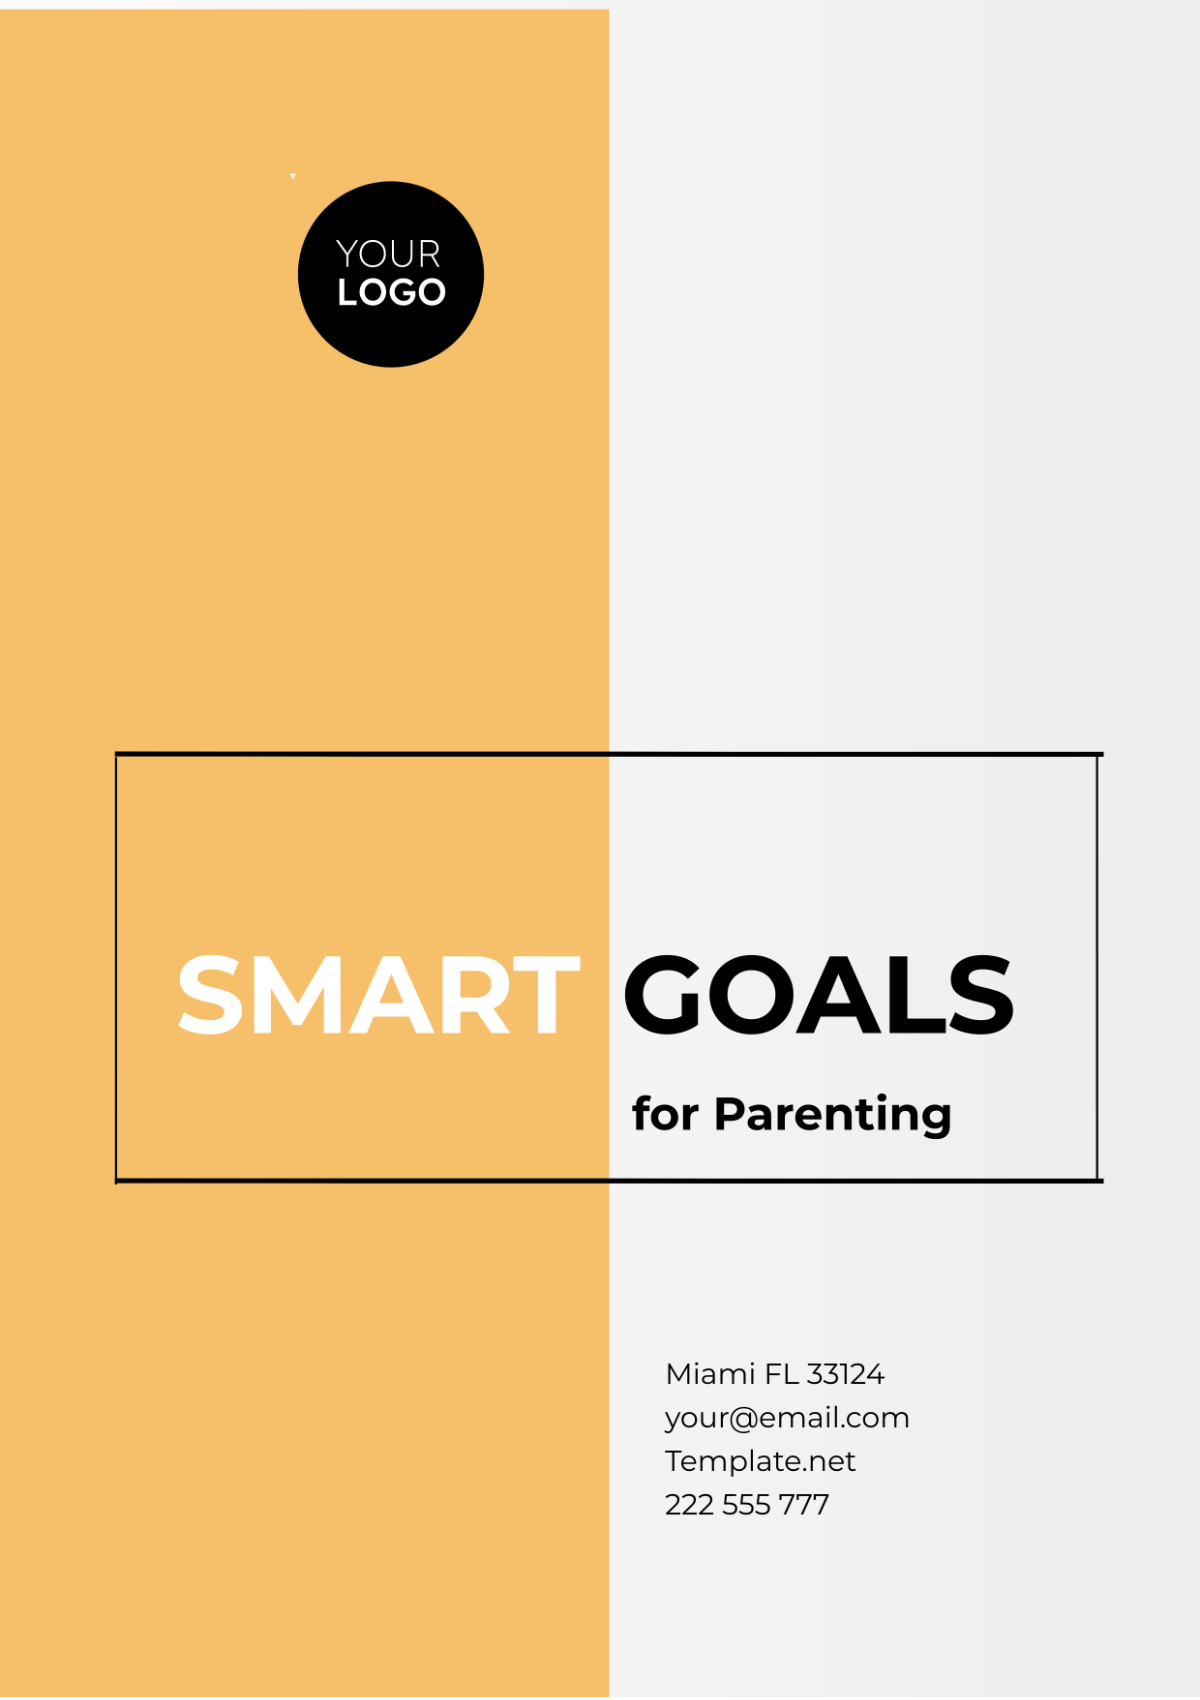 SMART Goals Template for Parenting